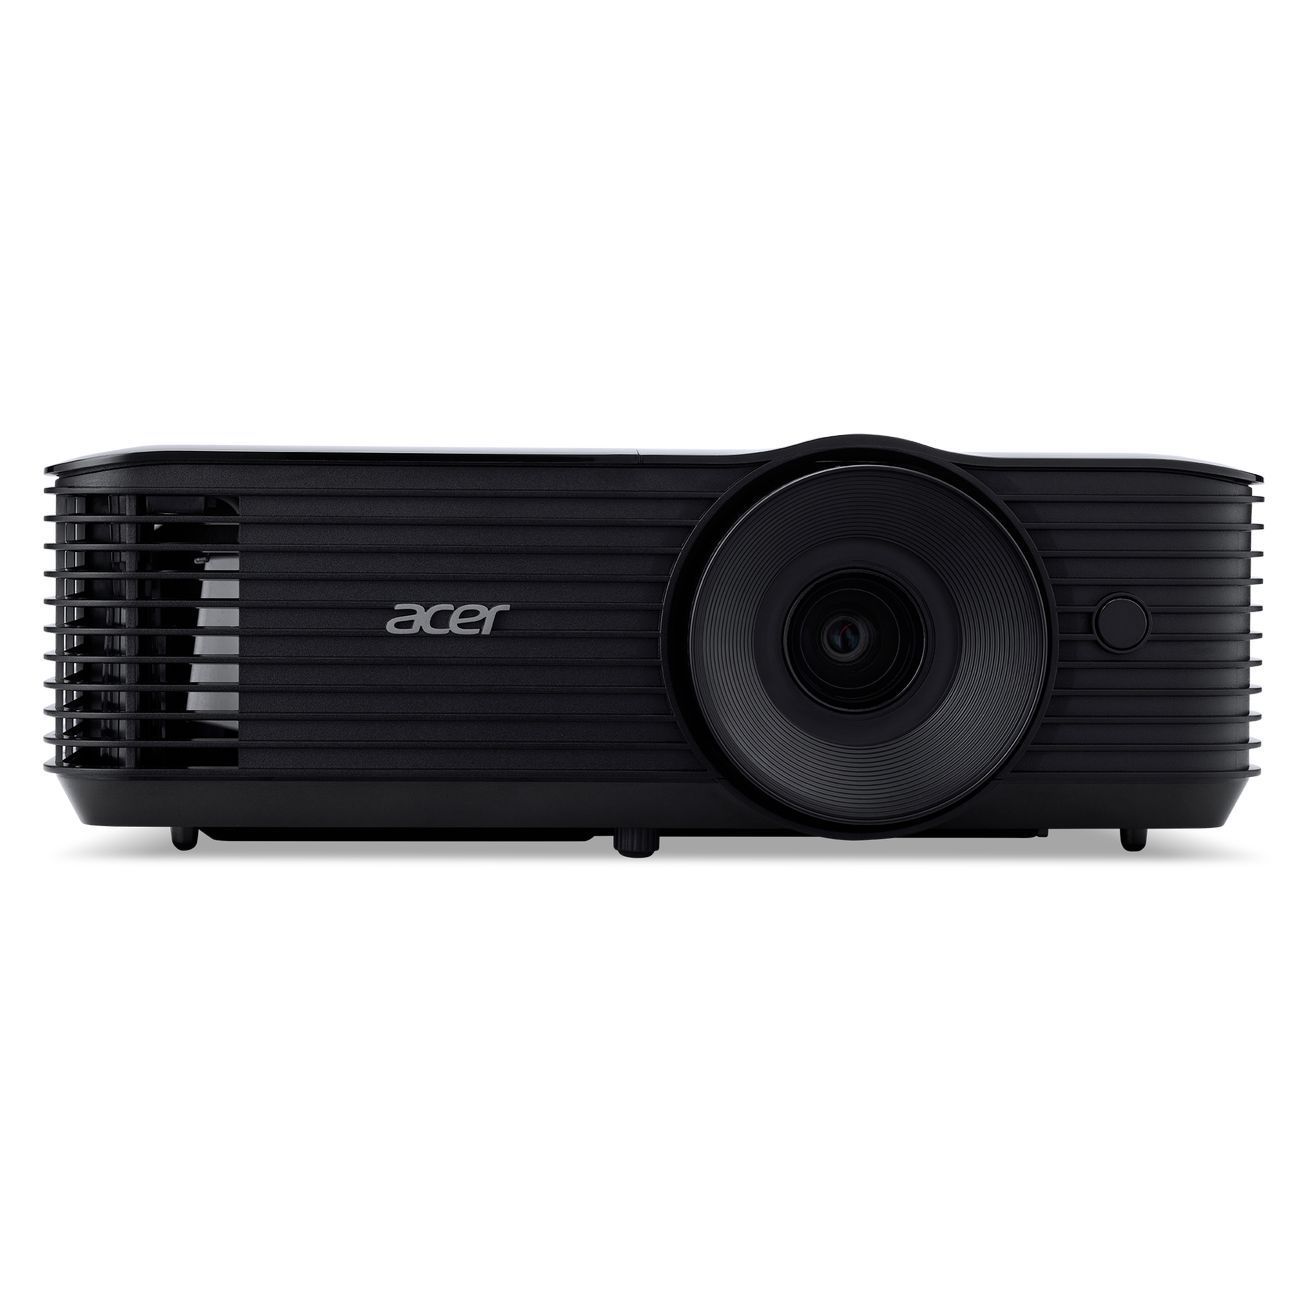 Acer x138whp